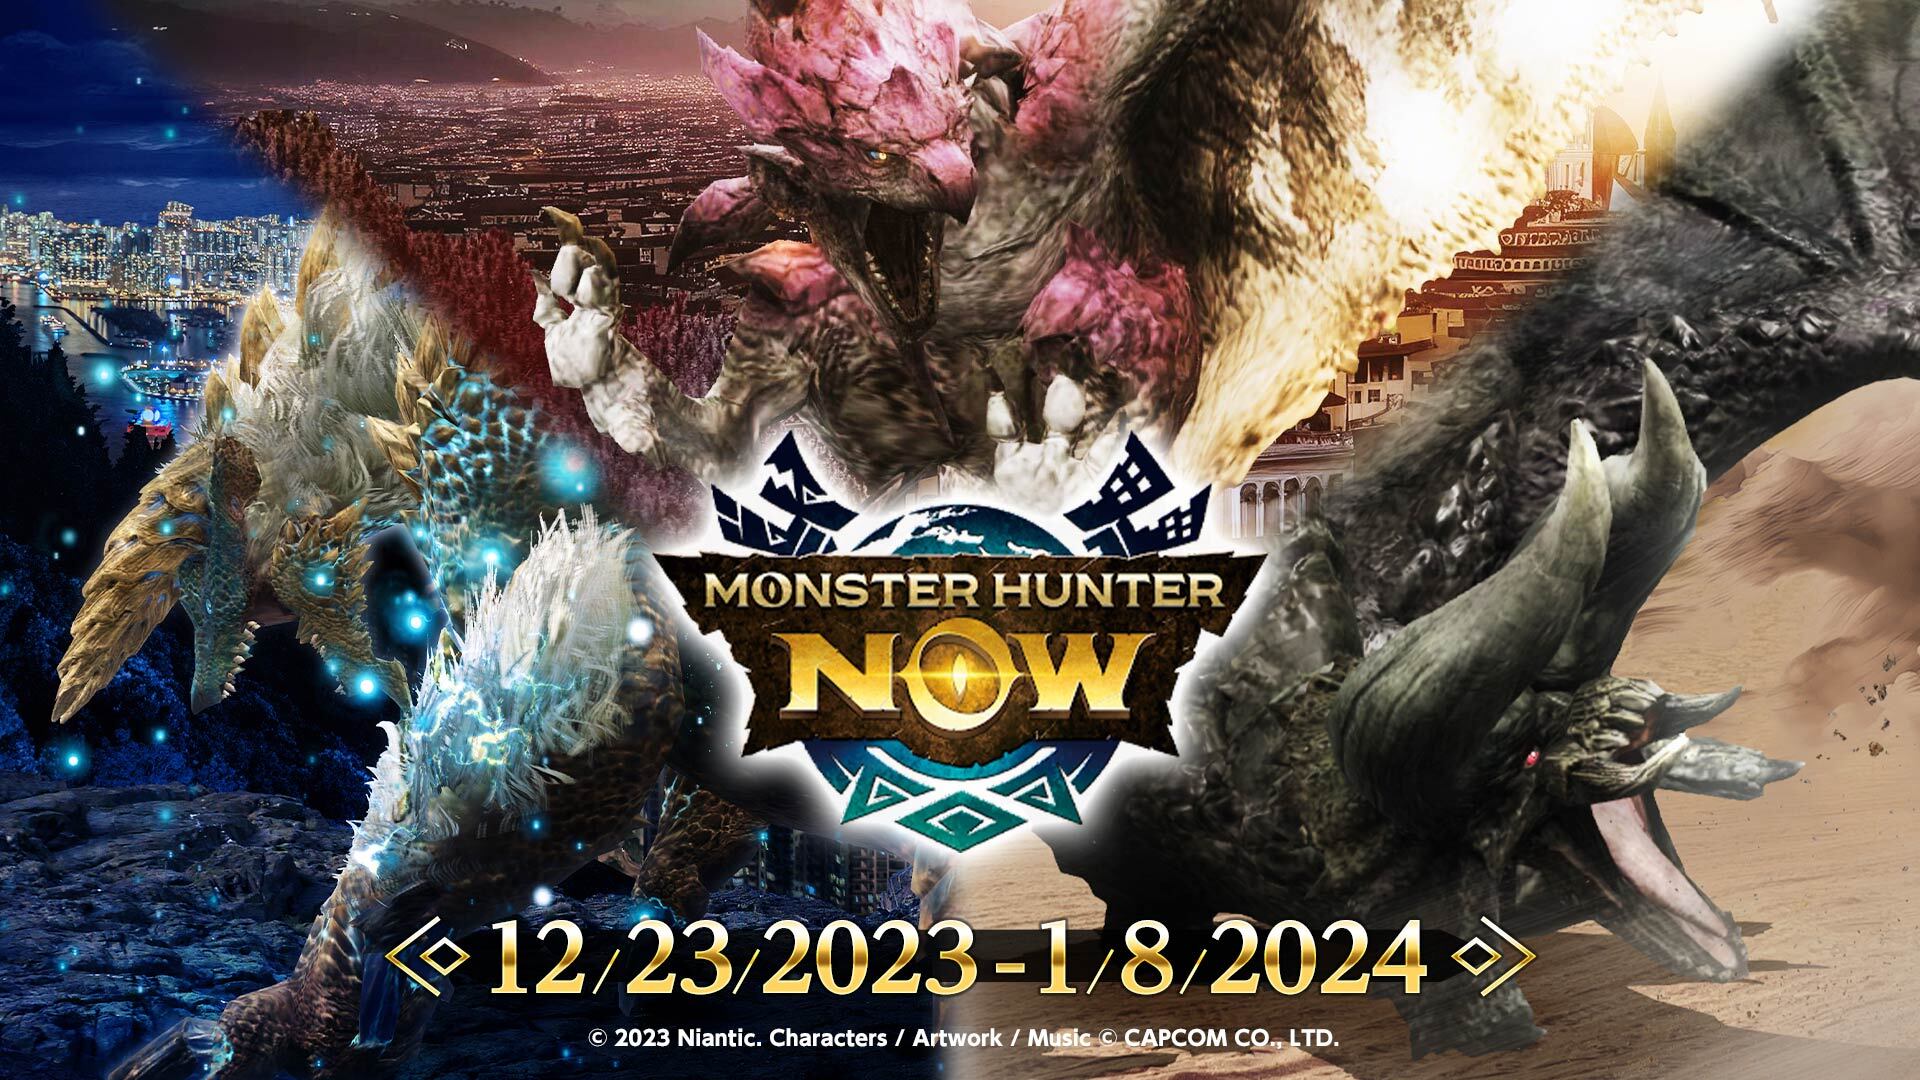 Monster Hunter Now soft-launches in Singapore ahead of its